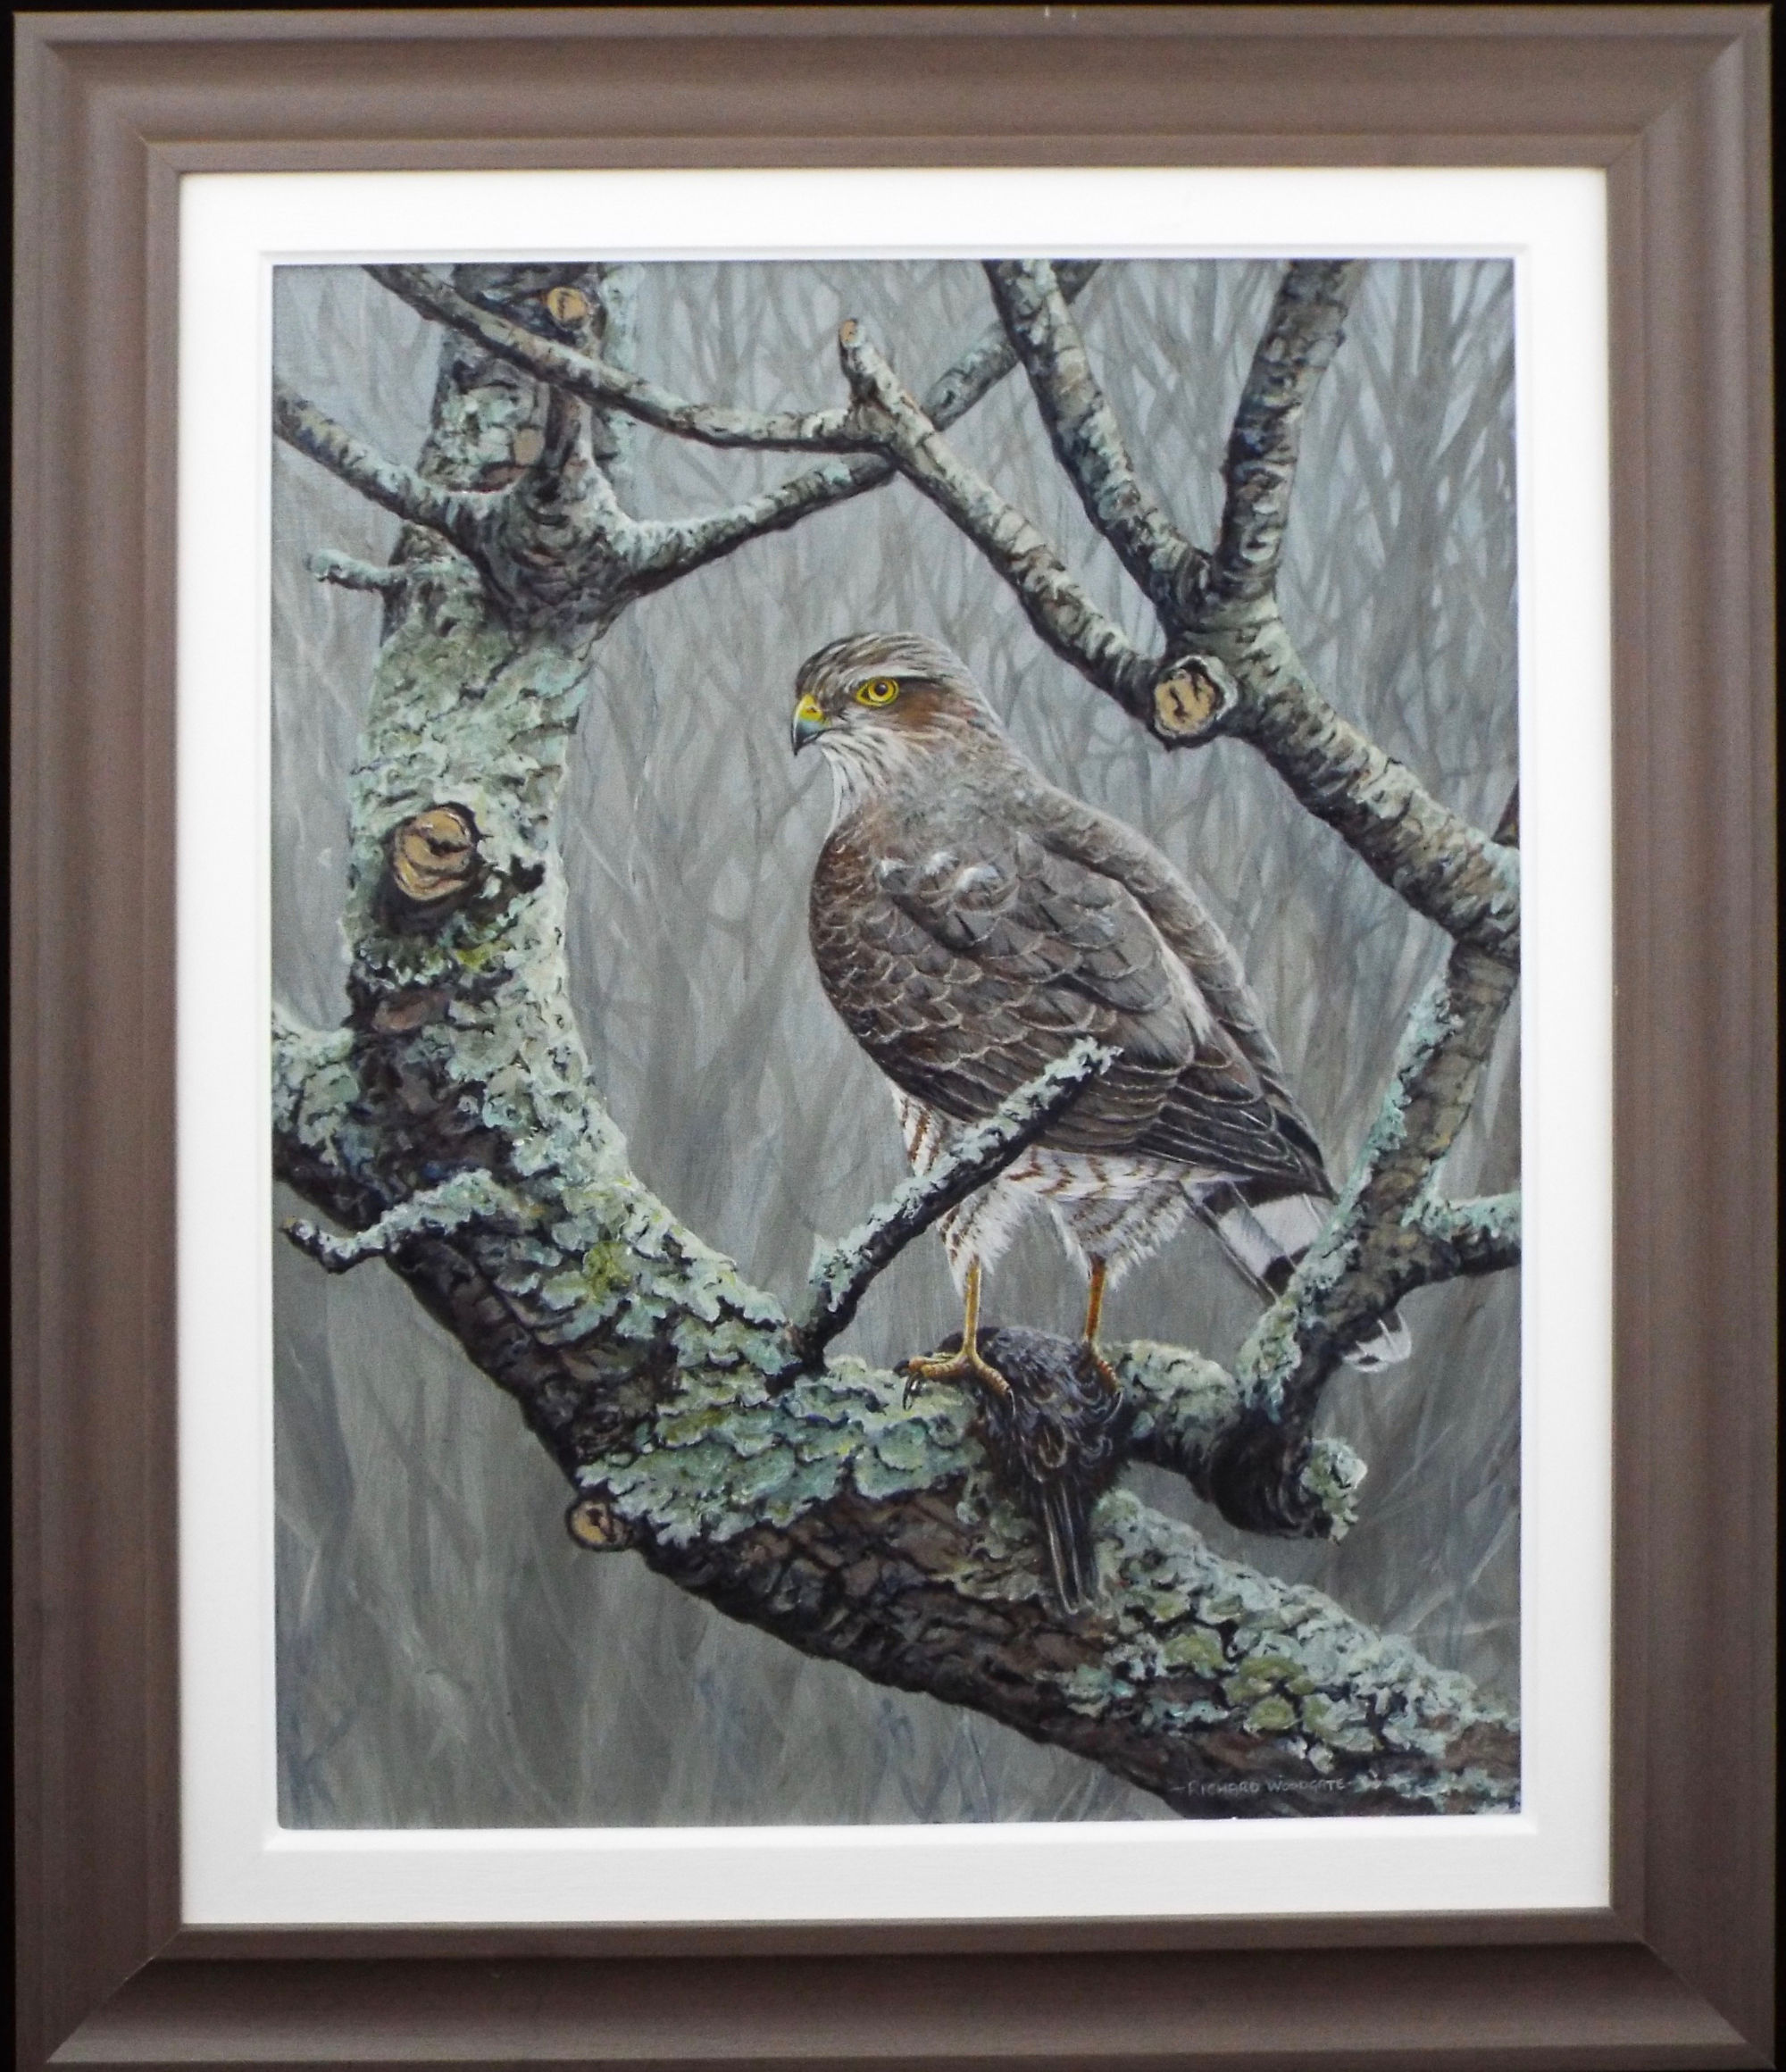 Sparrowhawk by Richard Woodgate.